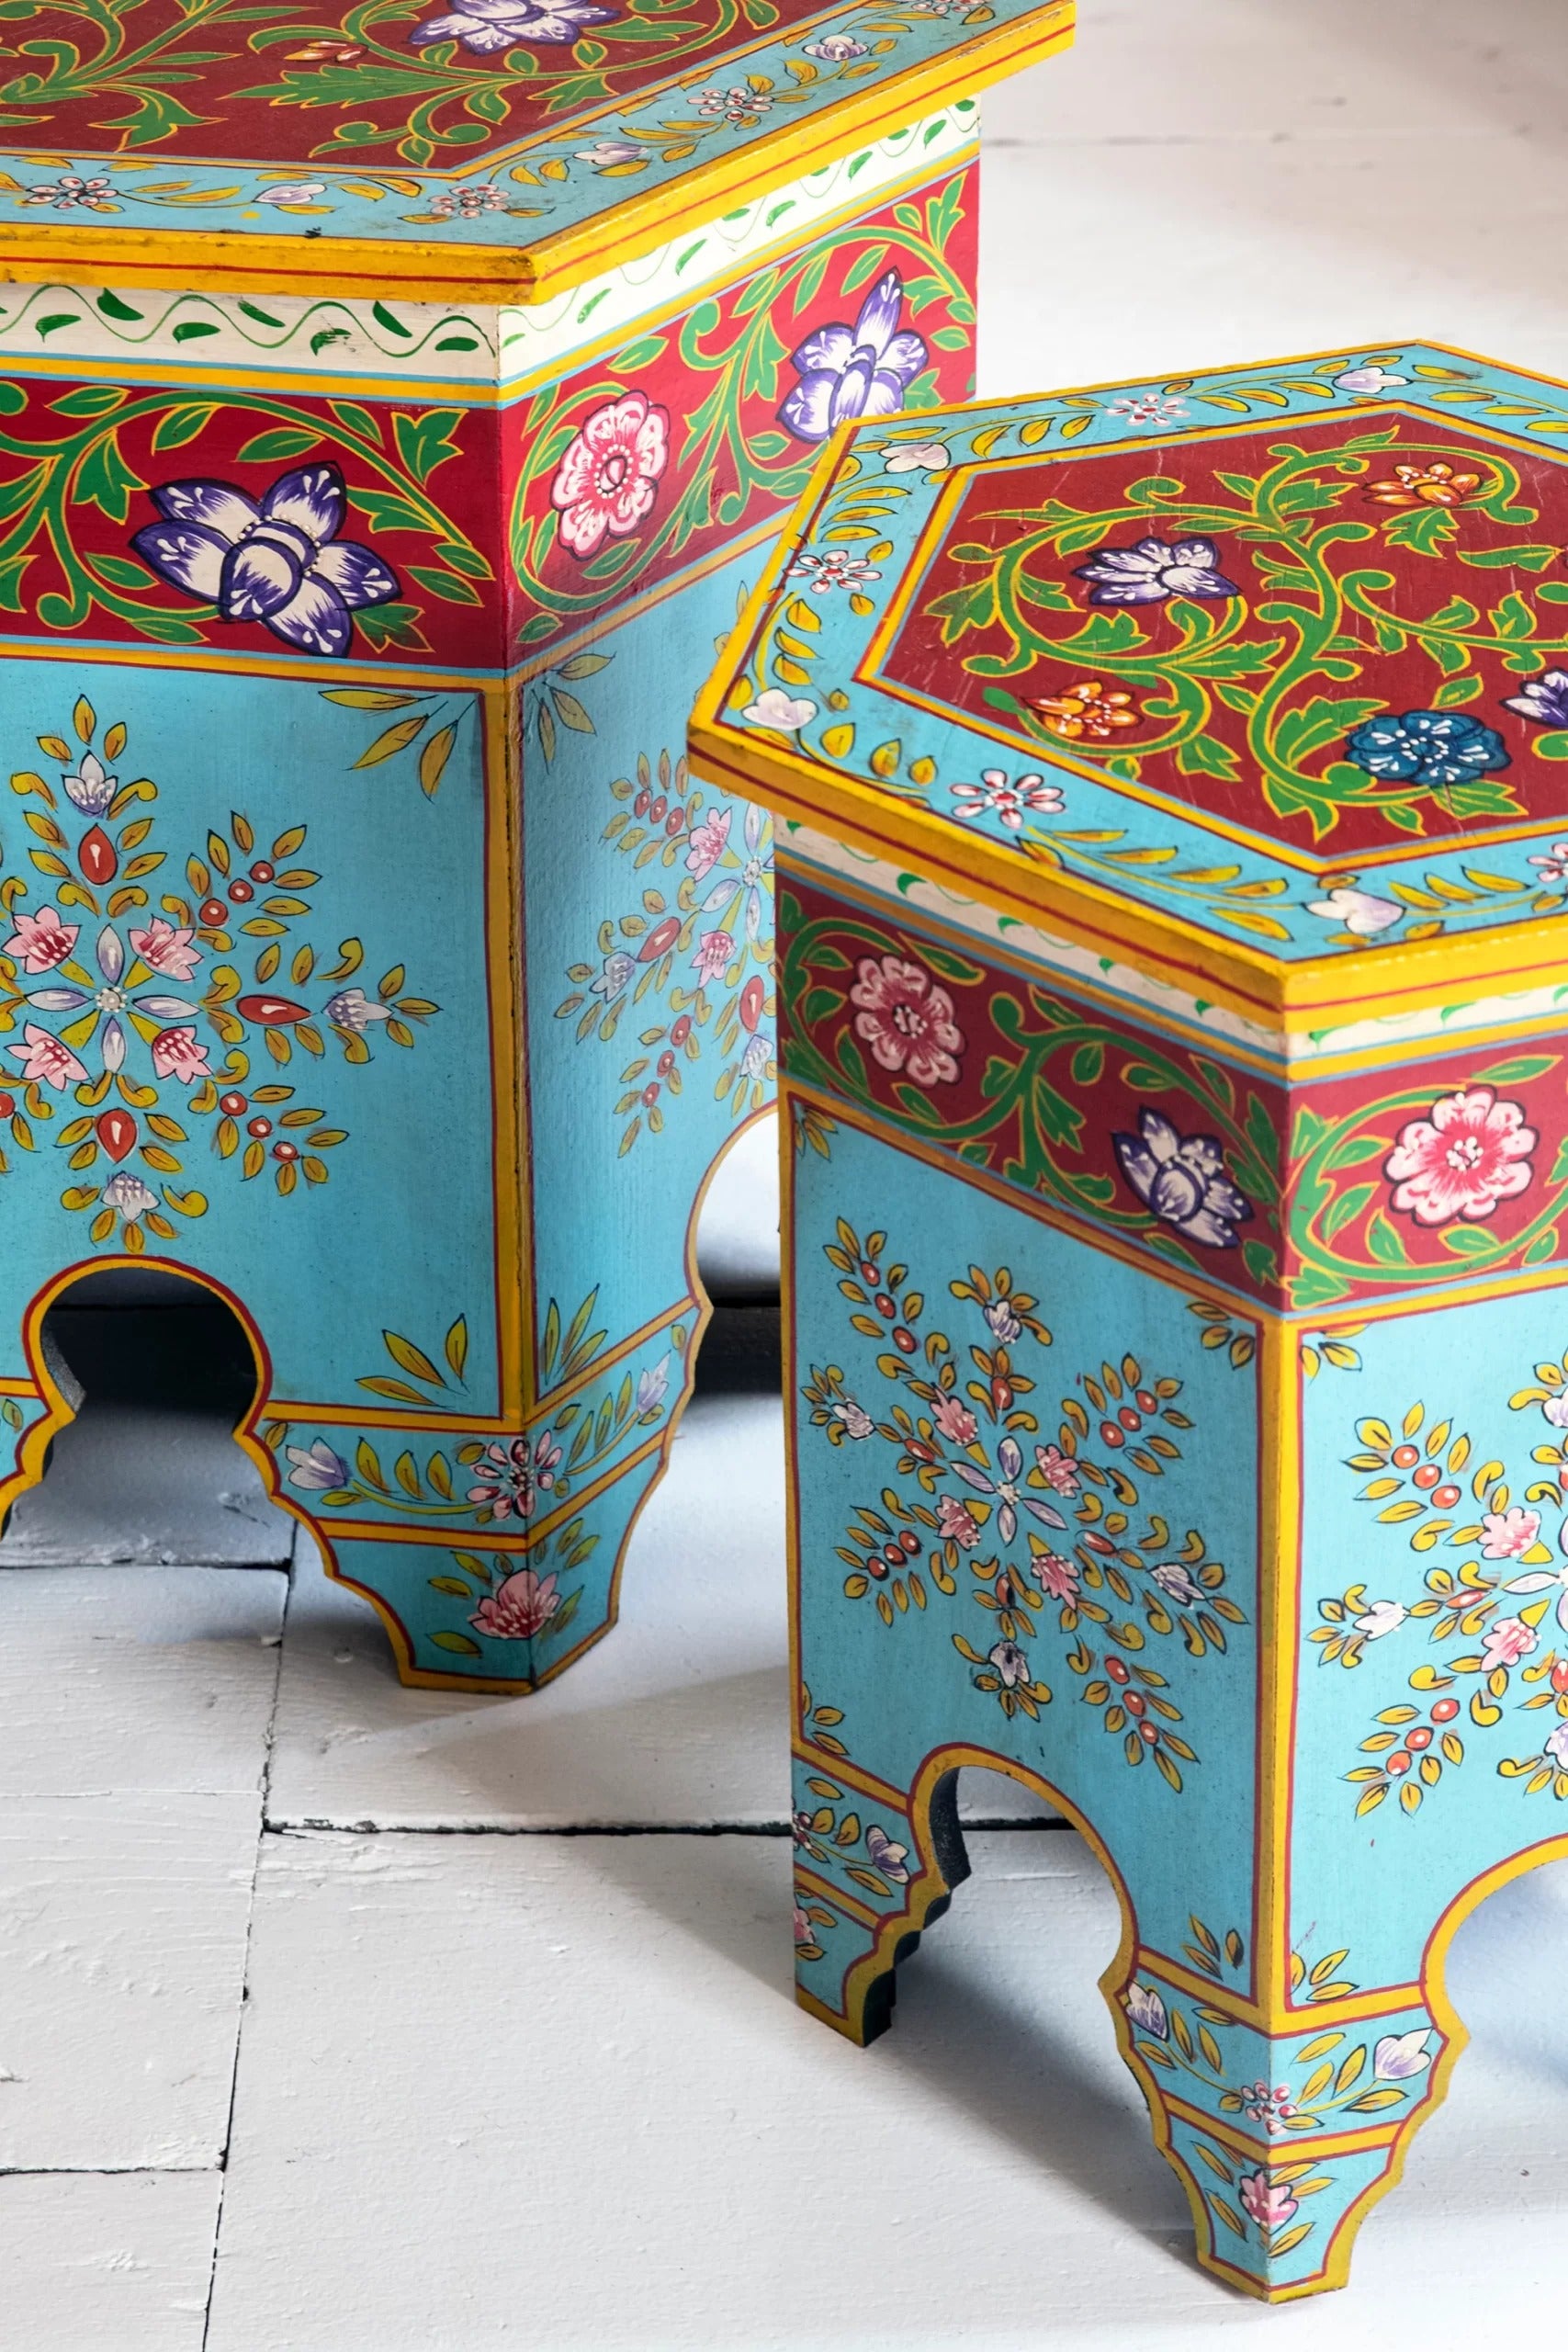 Jaipur Style Hand Painted Nested Side Coffee Table | Wooden Flower Rajasthani Bedside - J.L.HOME DECOR